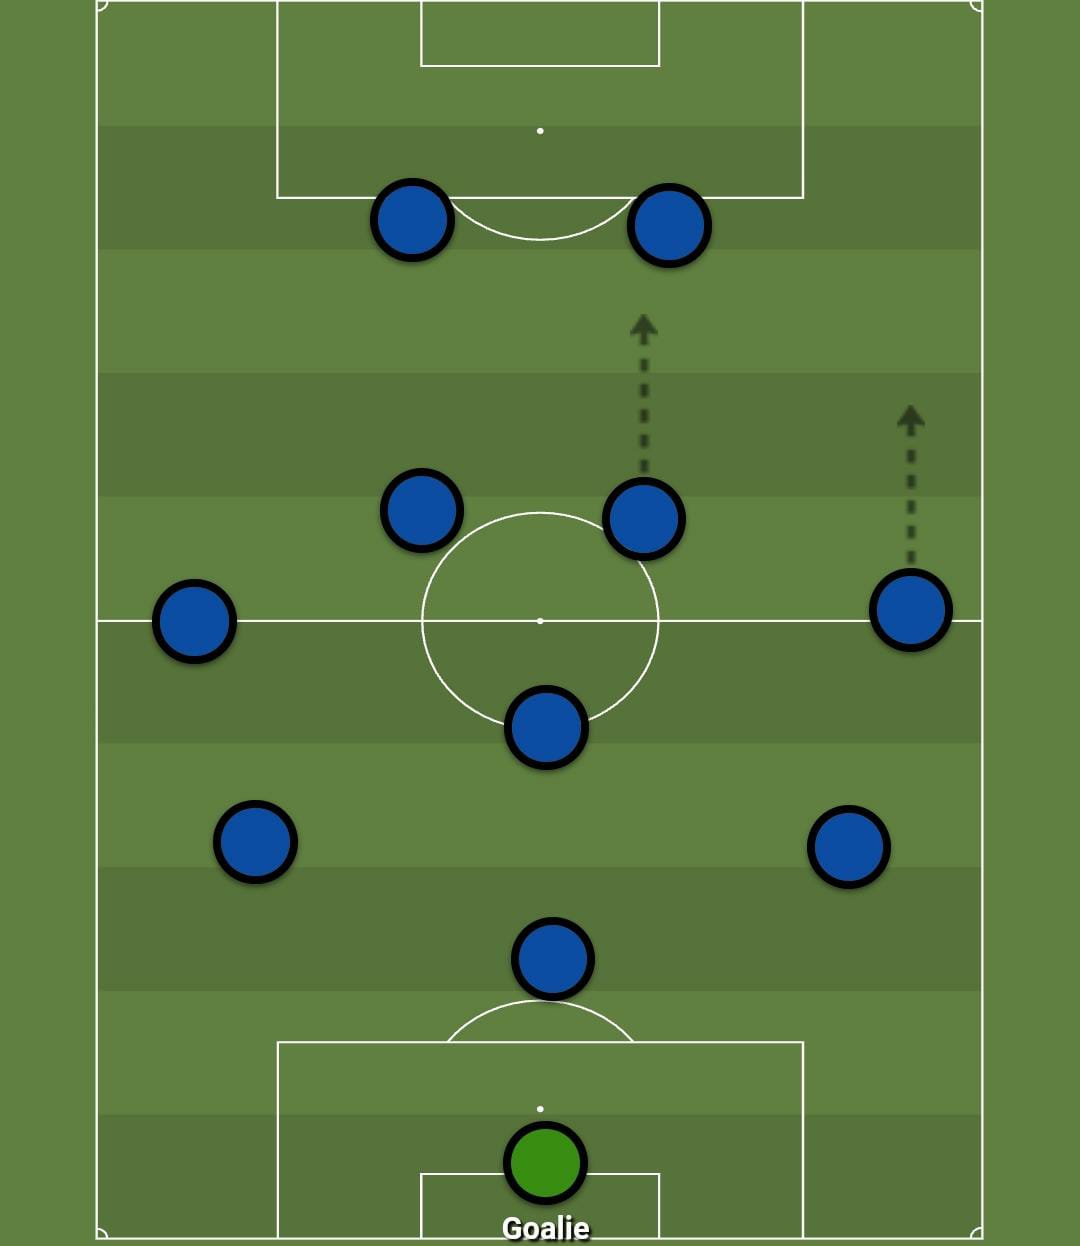  Antonio Conte system and style